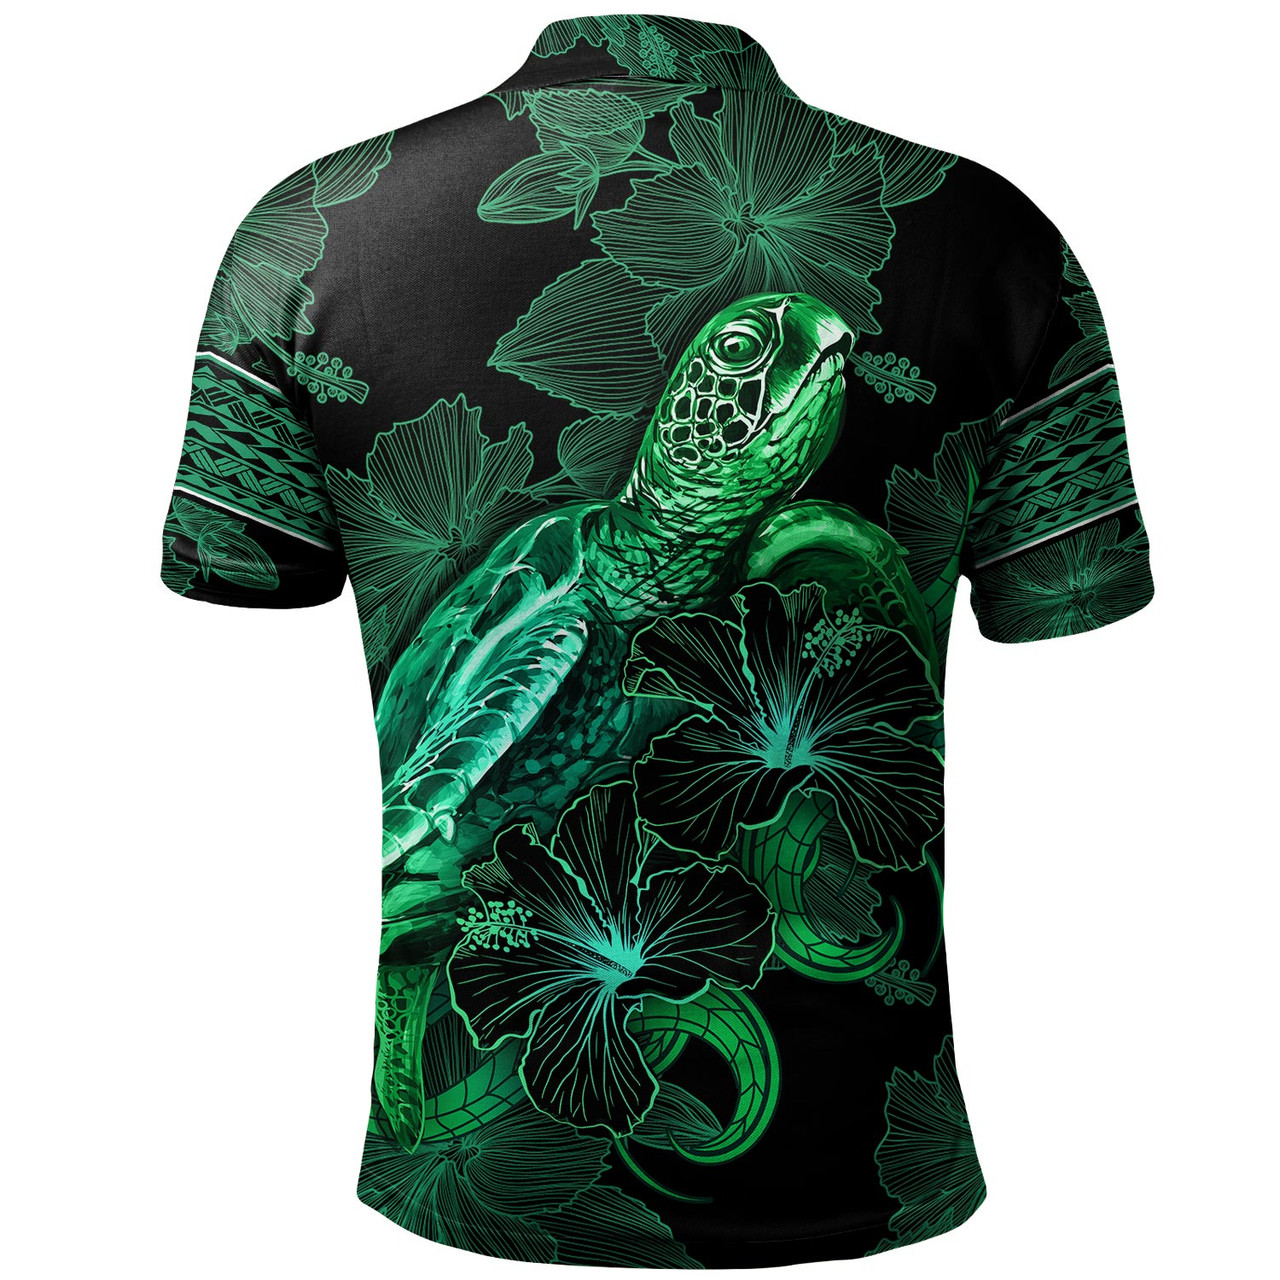 Yap State Polo Shirt  Sea Turtle With Blooming Hibiscus Flowers Tribal Green